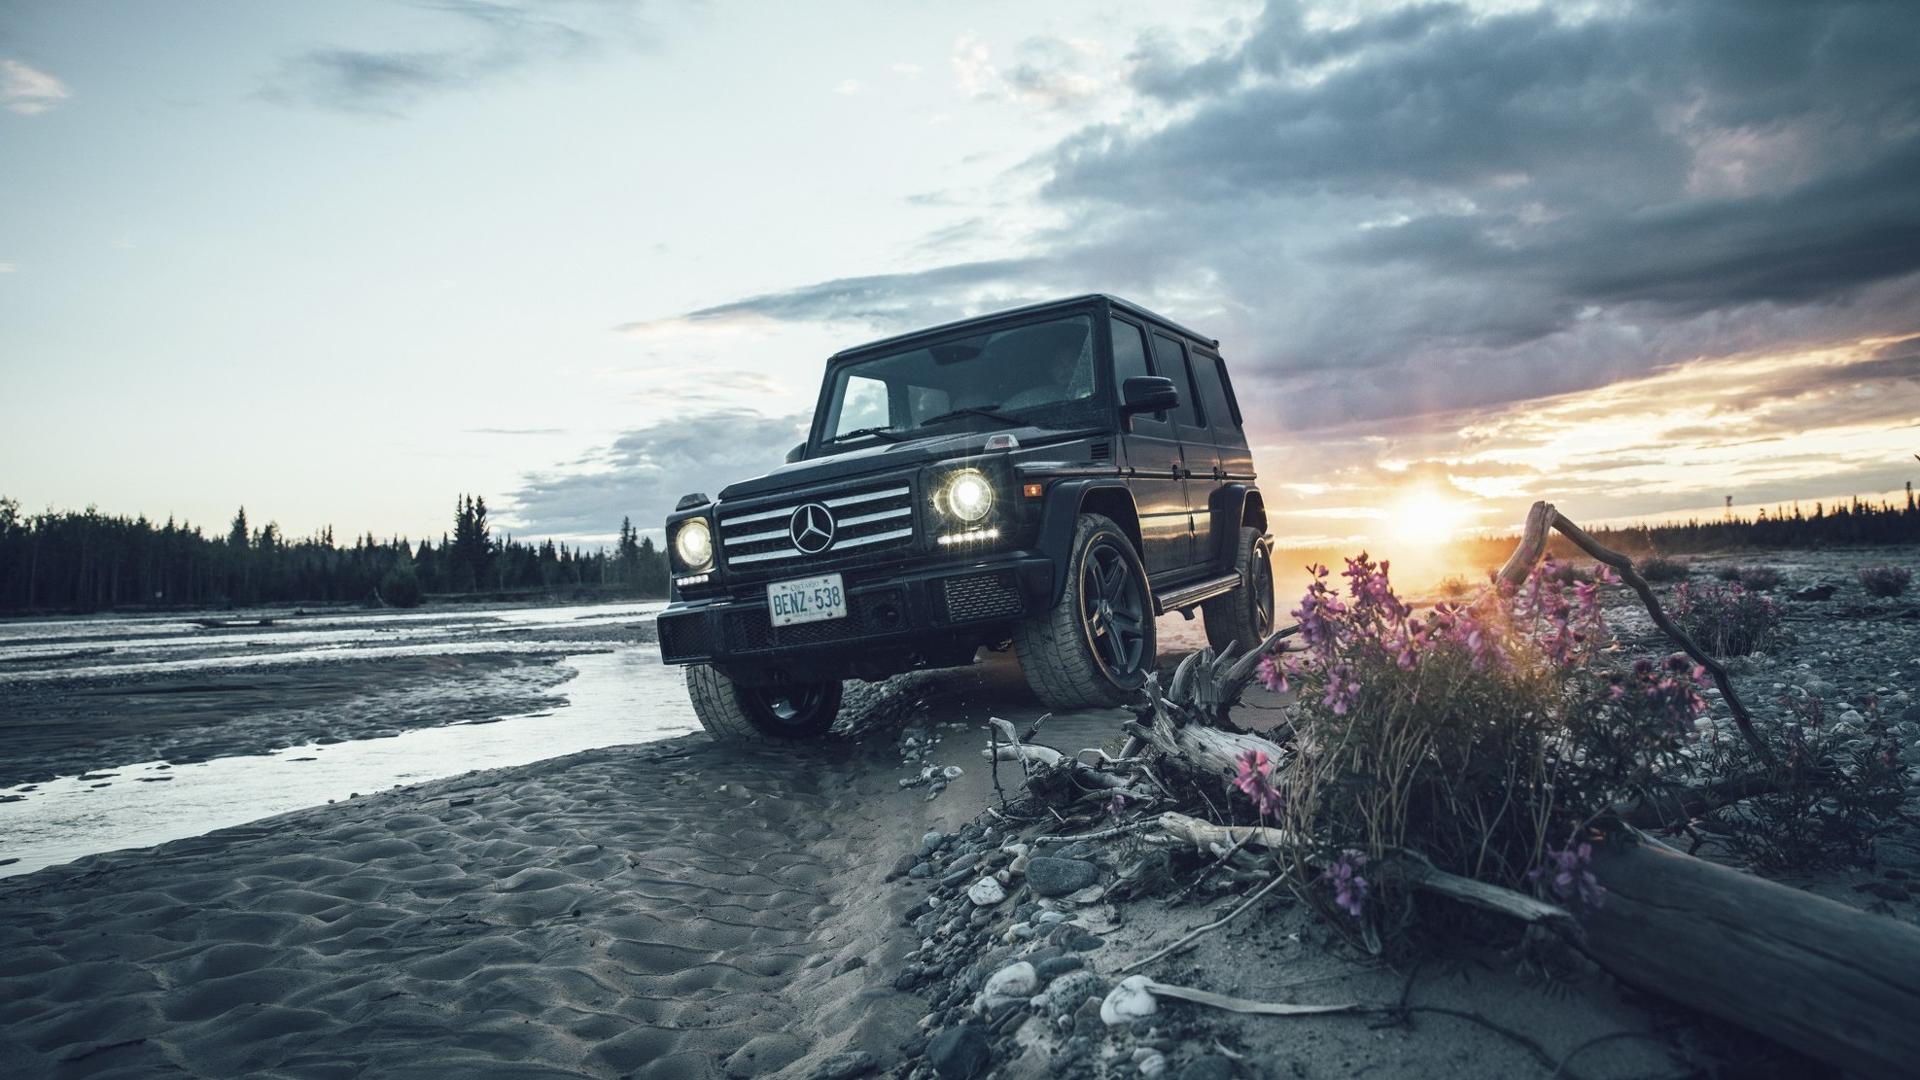 Mercedes G Class Goes On Tour, Eye Candy Photo Gallery Ensues